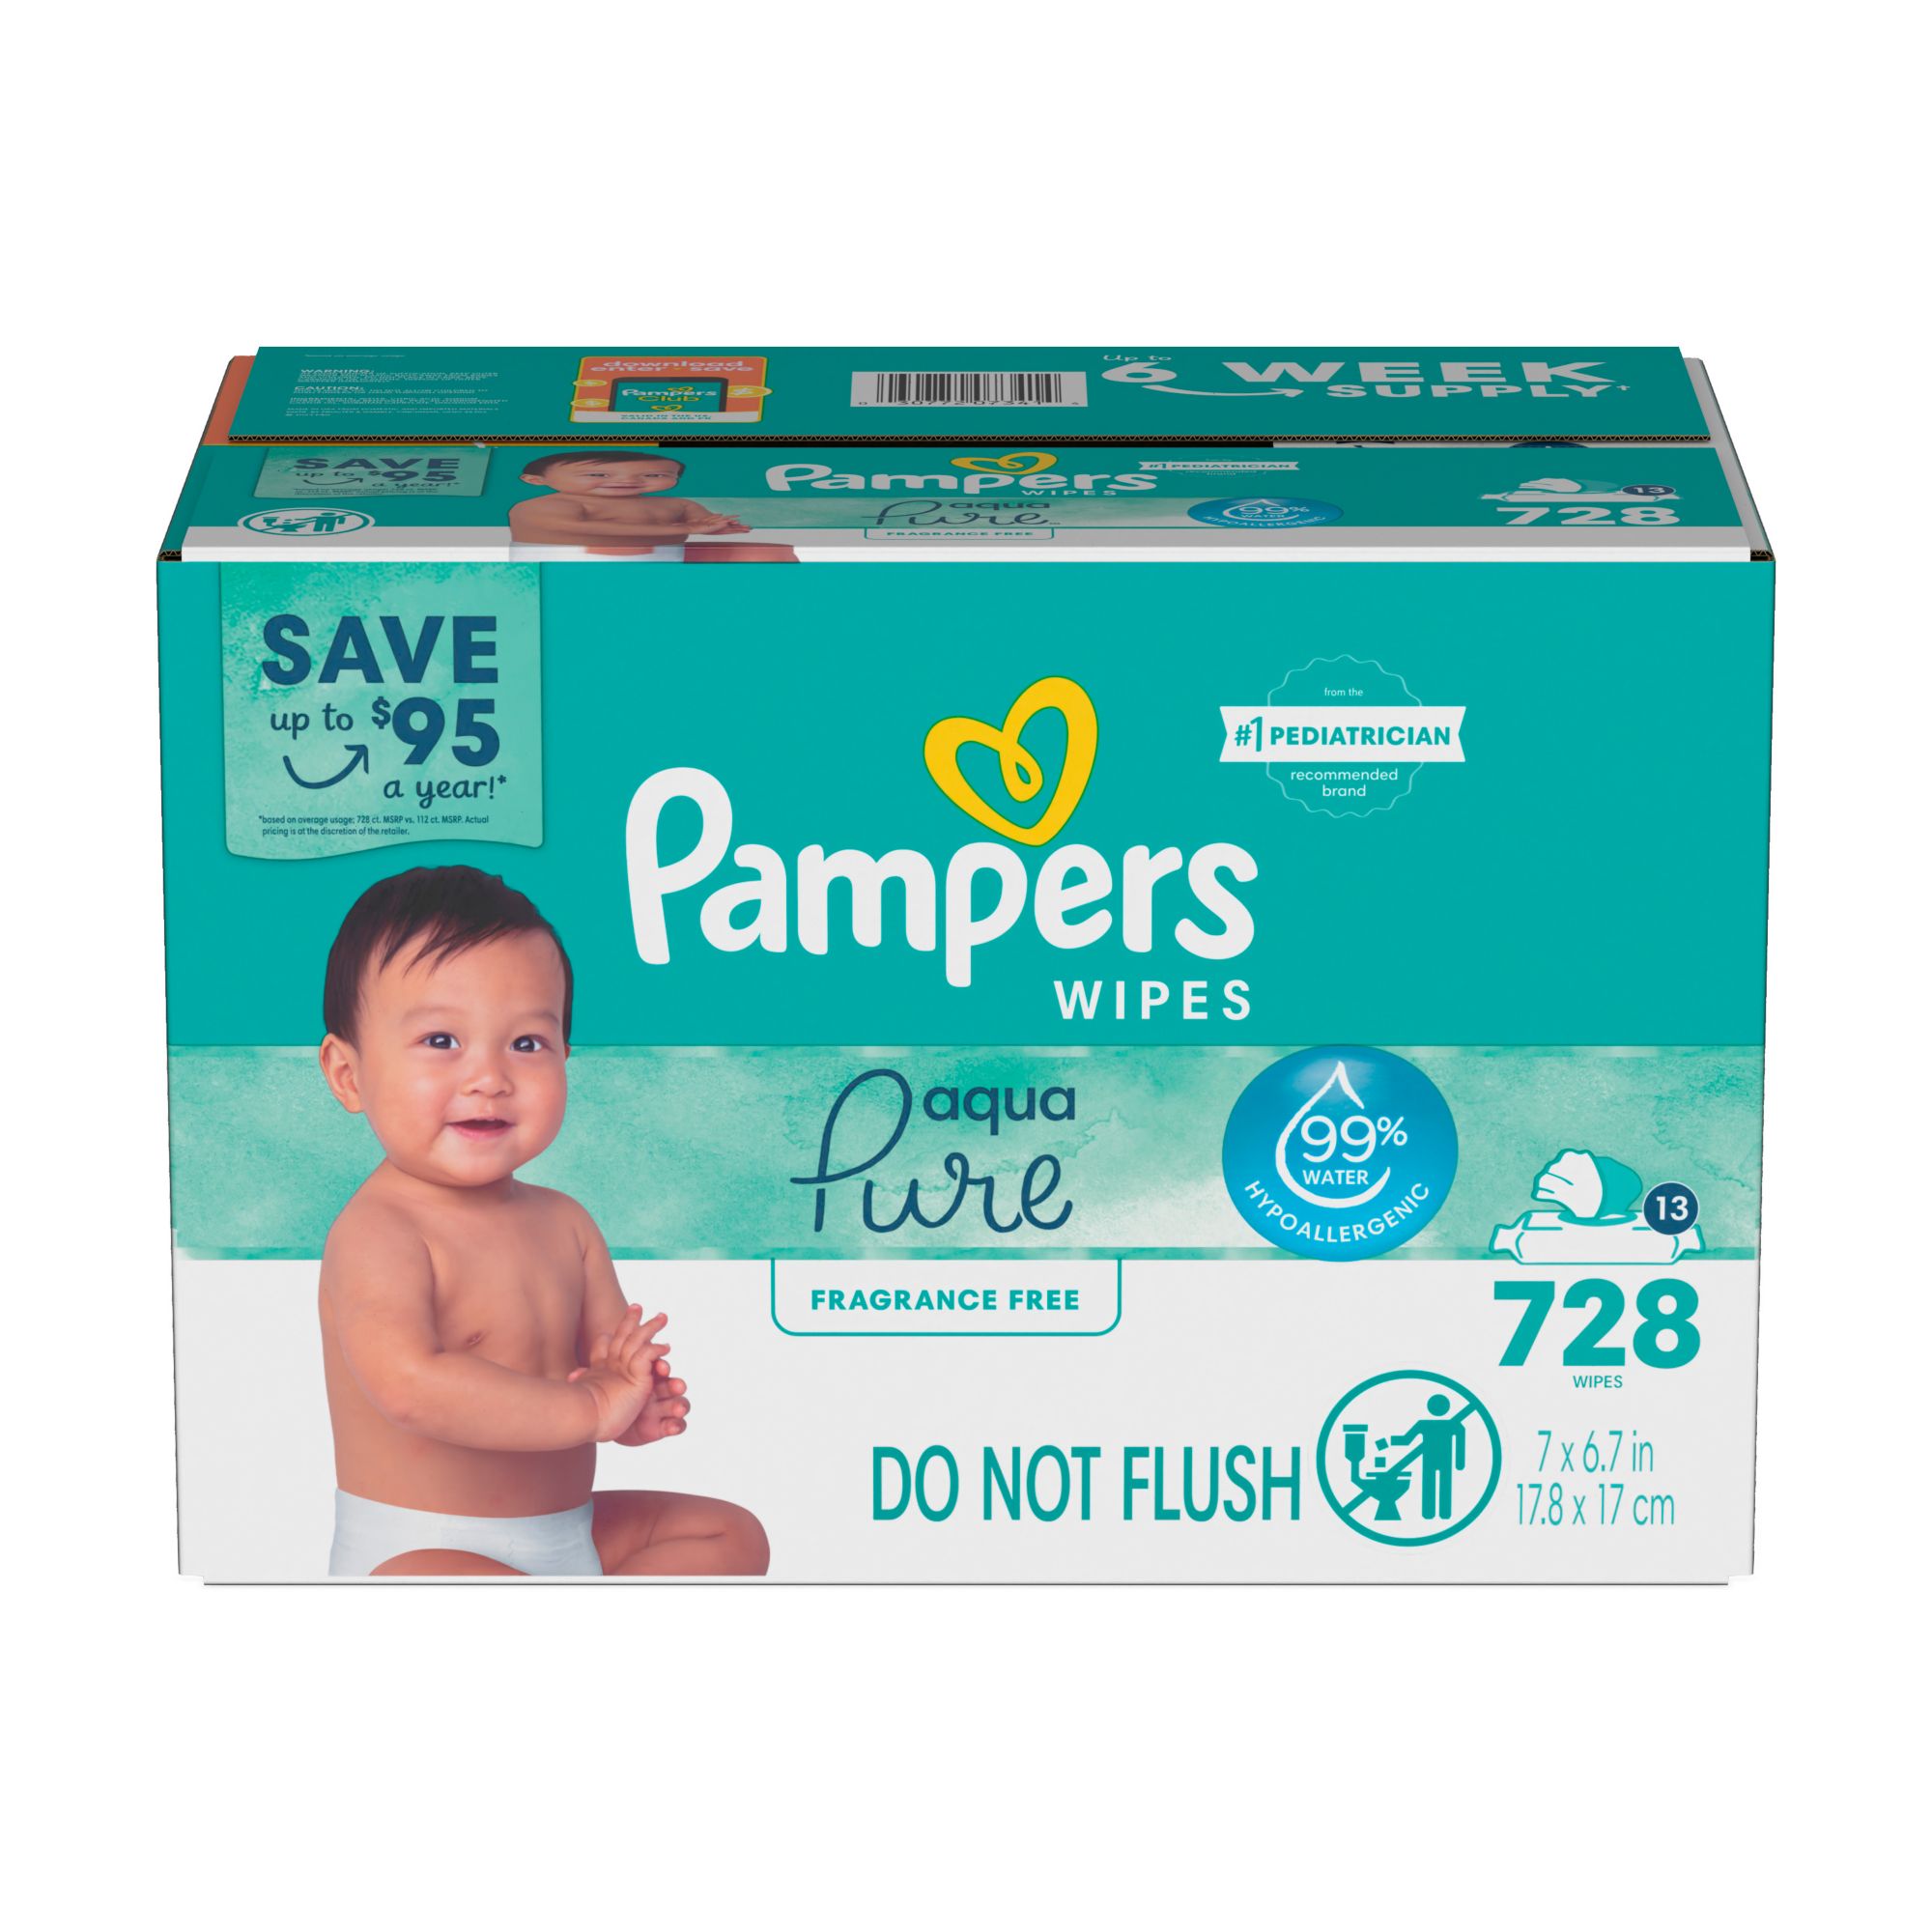 Pampers Swaddlers Diapers, Size 1-6, 92-192 ct.